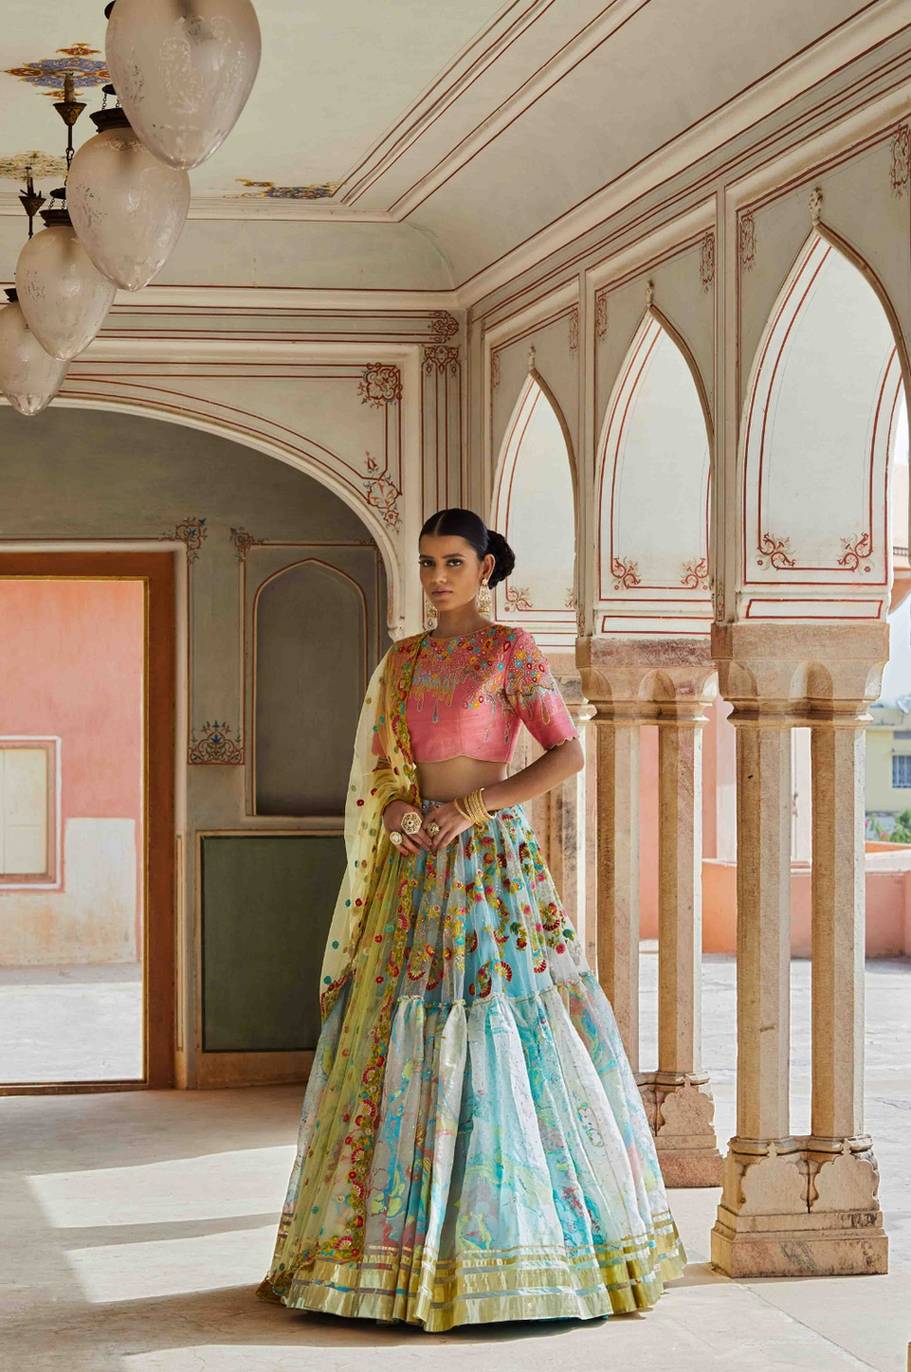 Types Of Lehenga Skirts & How To Choose According To Your Body Type